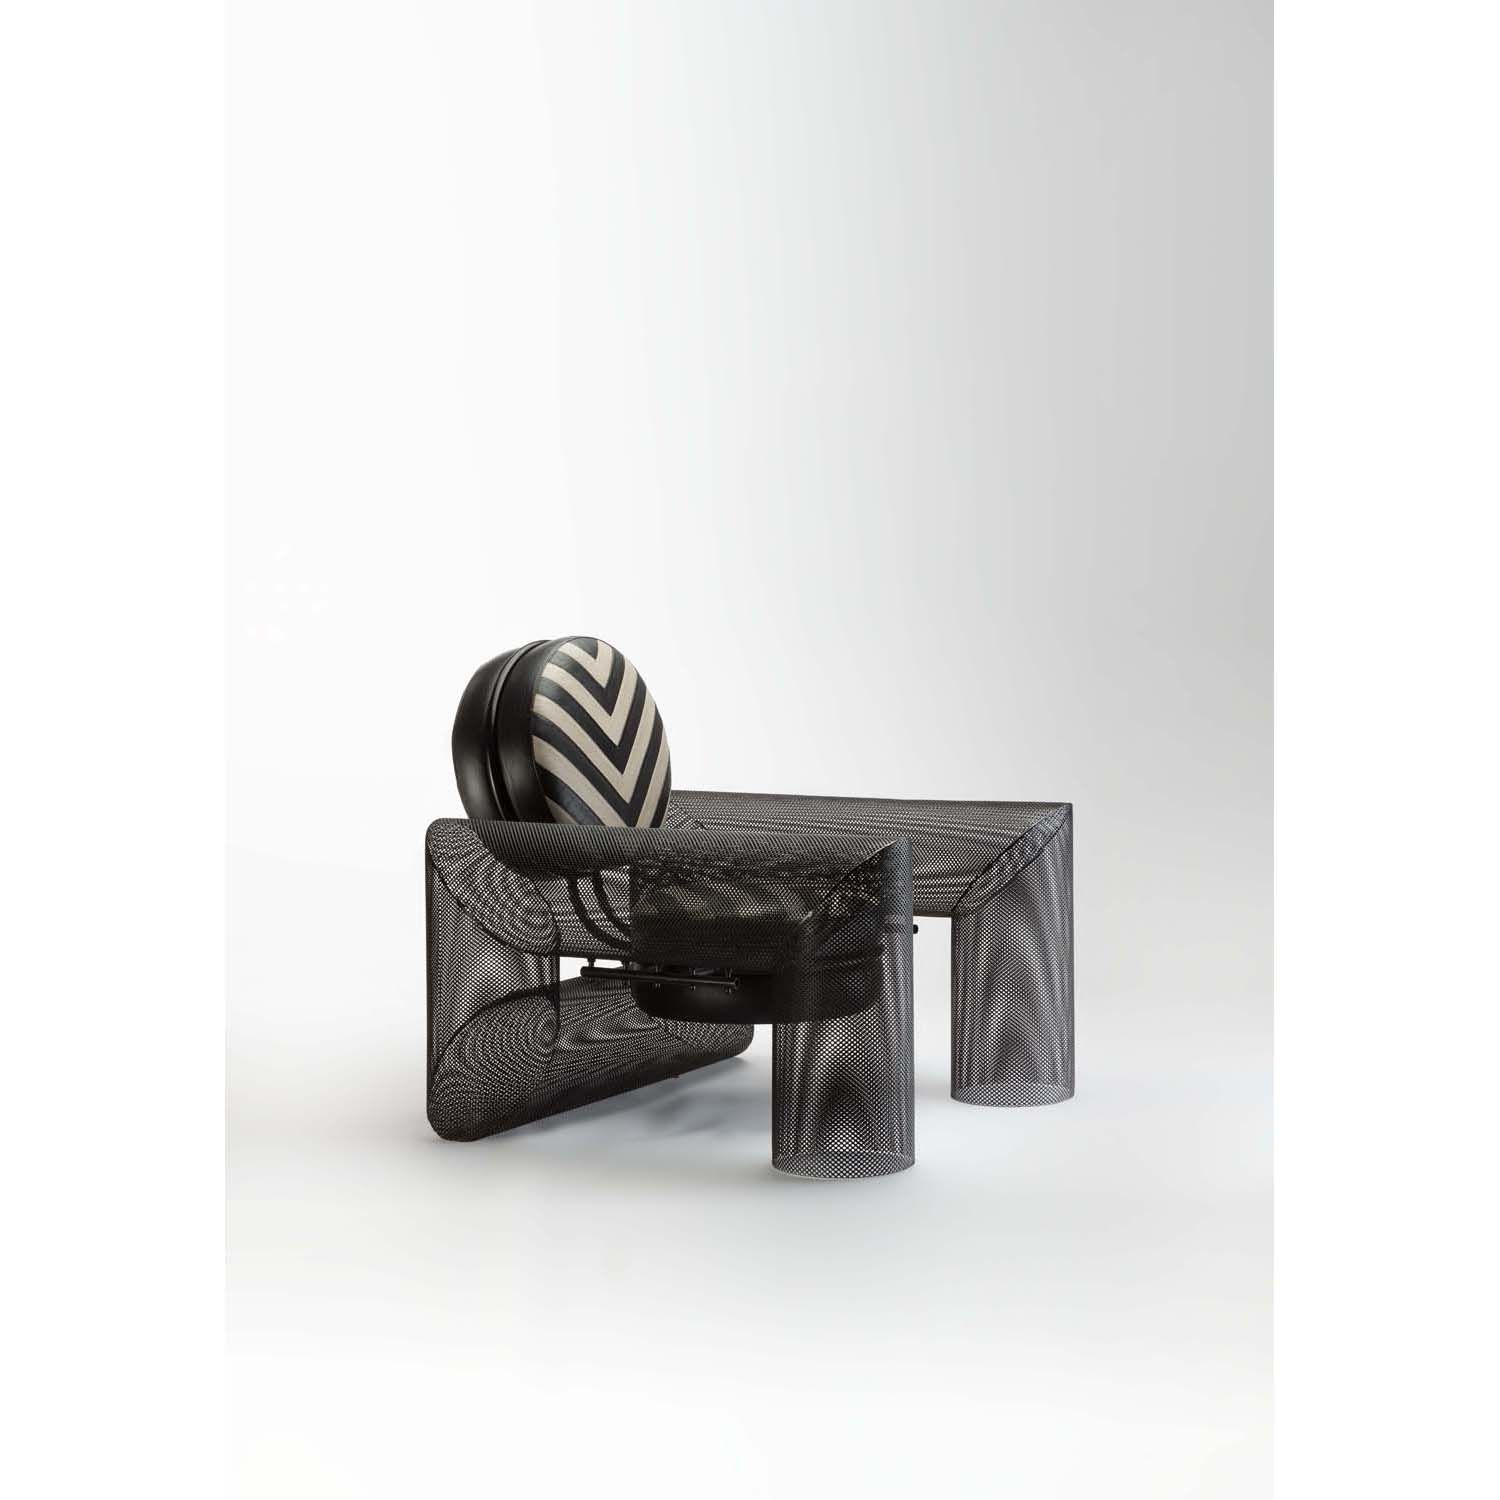 Null Mario Botta (born 1943)
'Prince chair'
Lacquered metal and leather
Edited b&hellip;